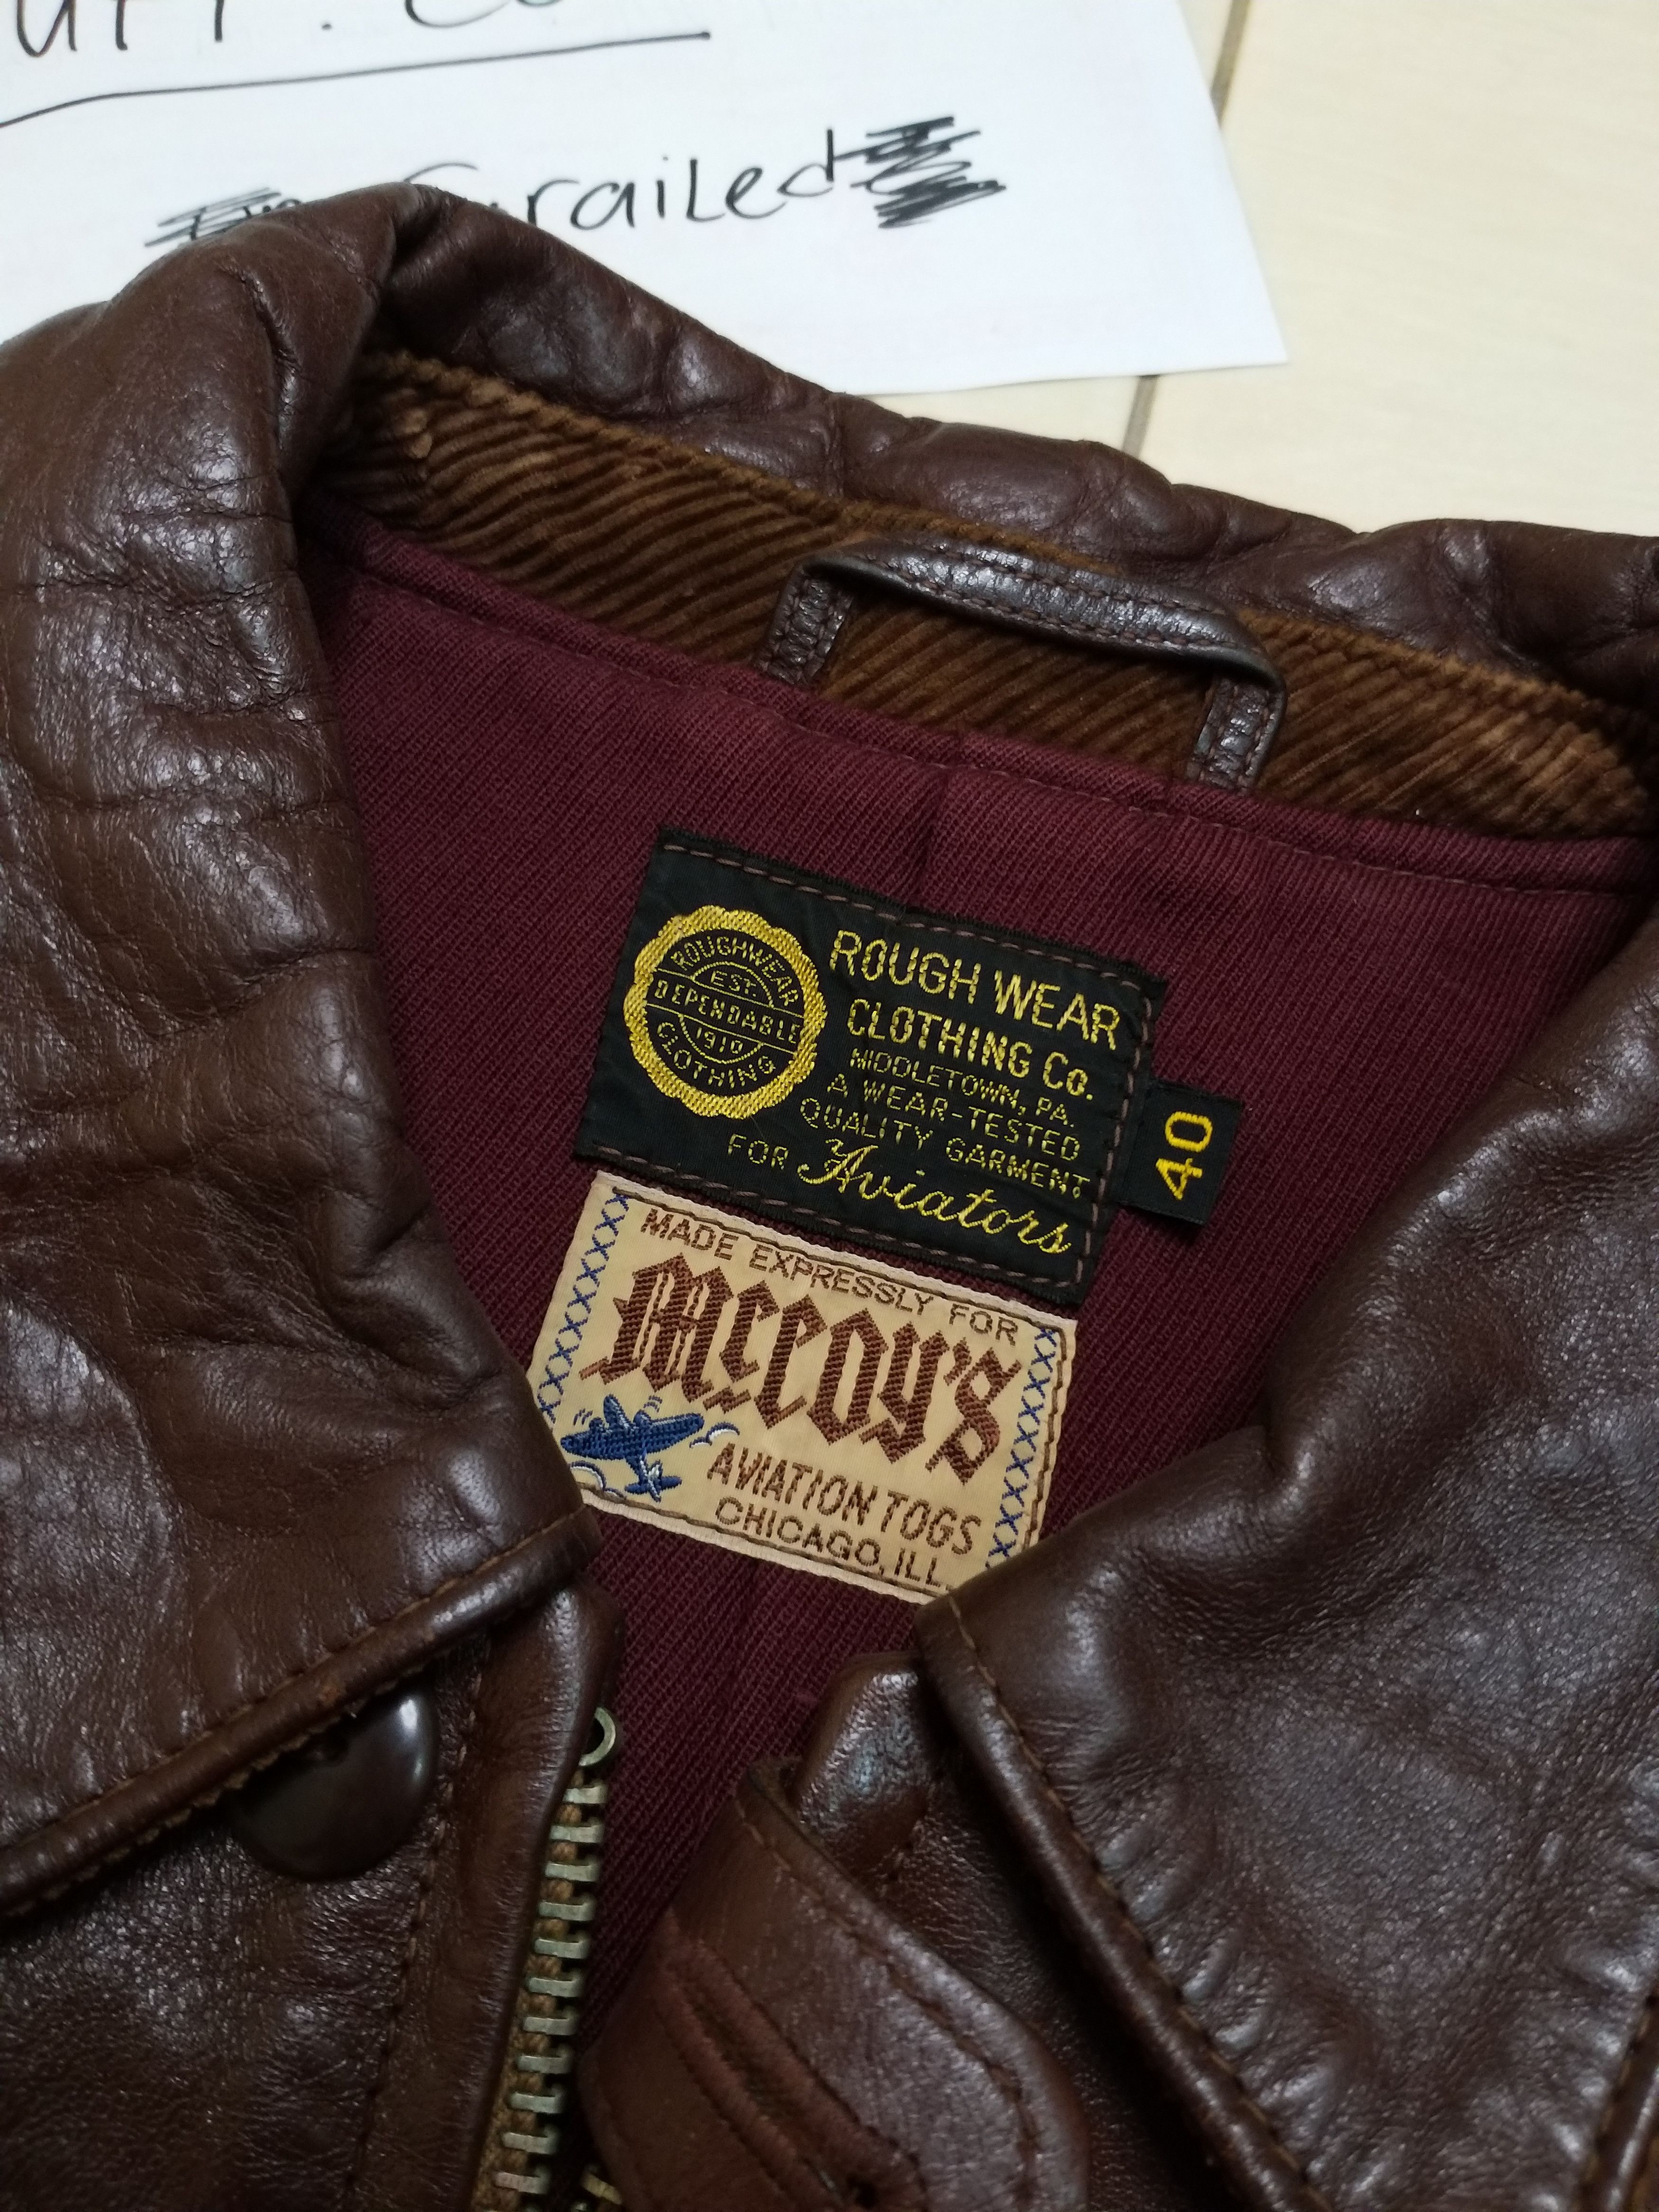 The Real McCoy's The Real McCoy's roughwear clothing 30s jacket for Aviators Size US L / EU 52-54 / 3 - 2 Preview